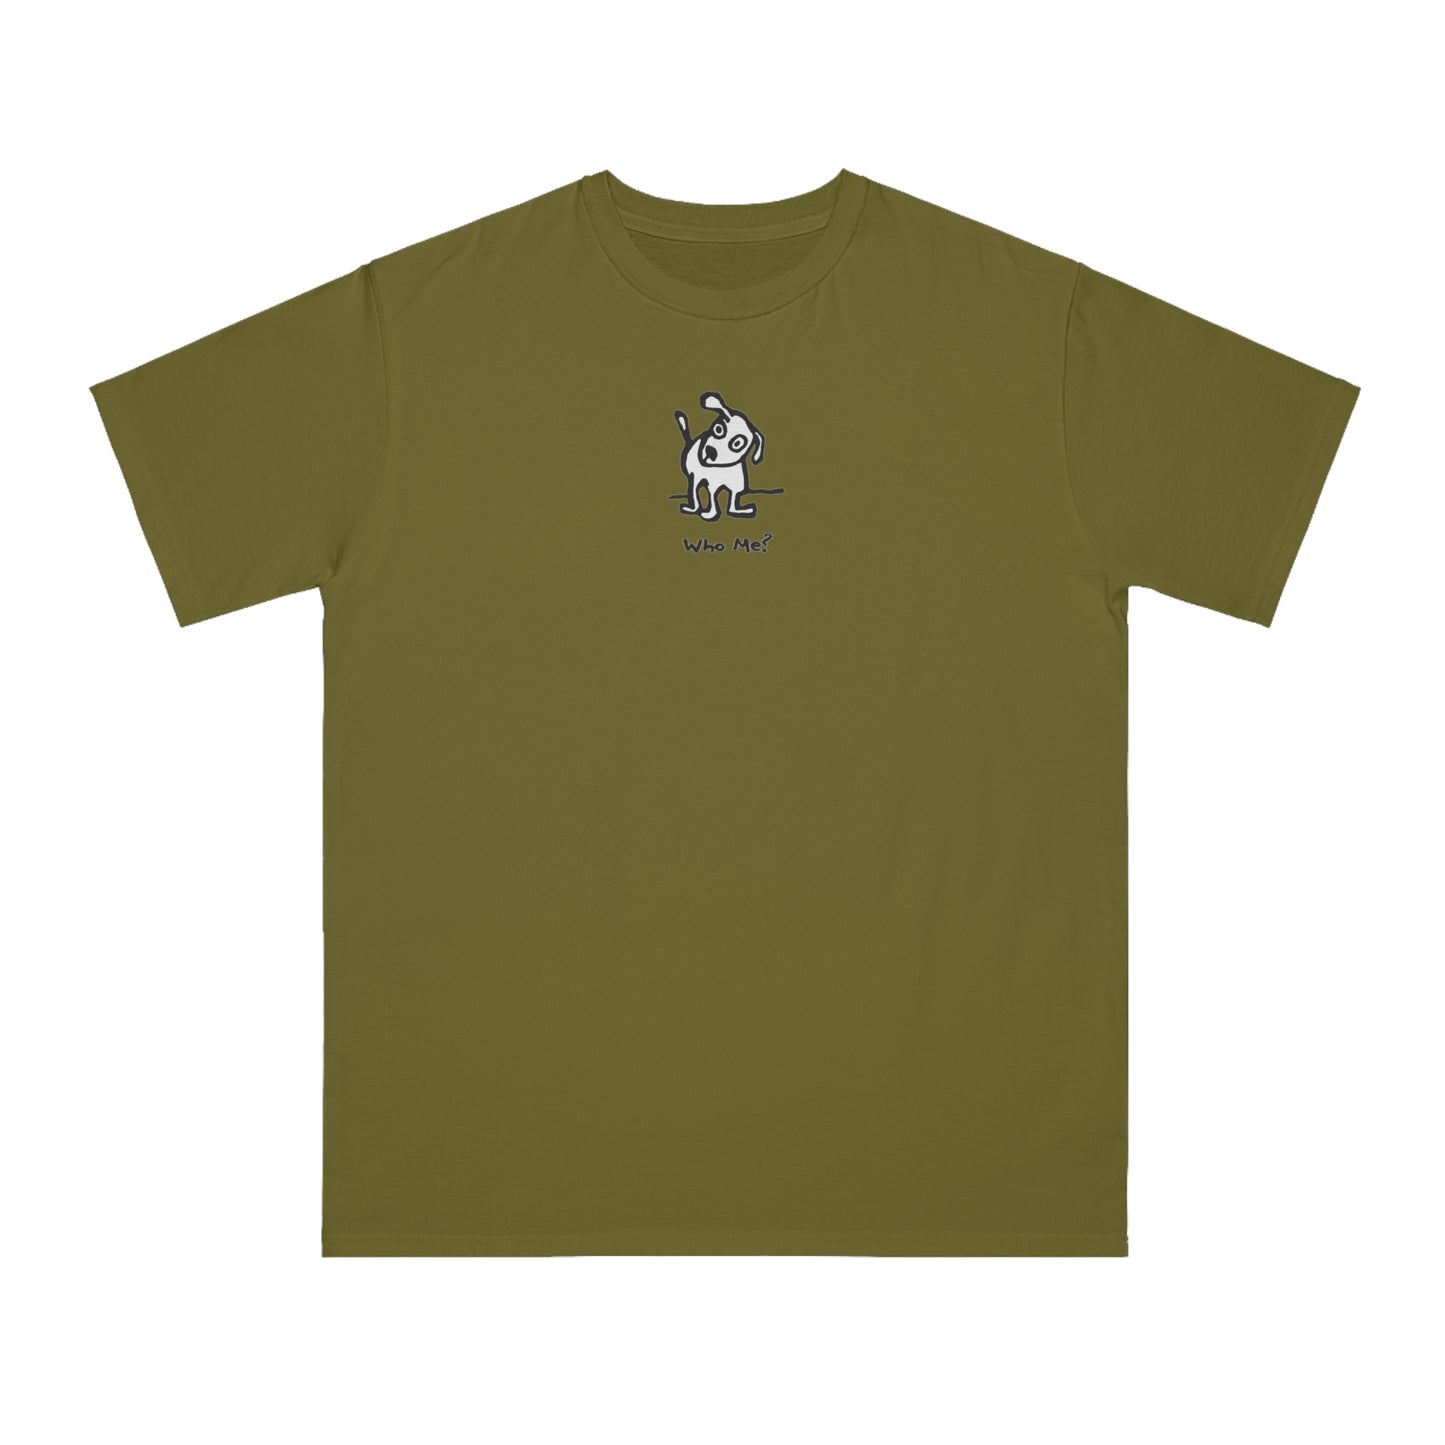 White dog with head cocked to one side on olive color unisex men's t-shirt. Text under image reads Who Me